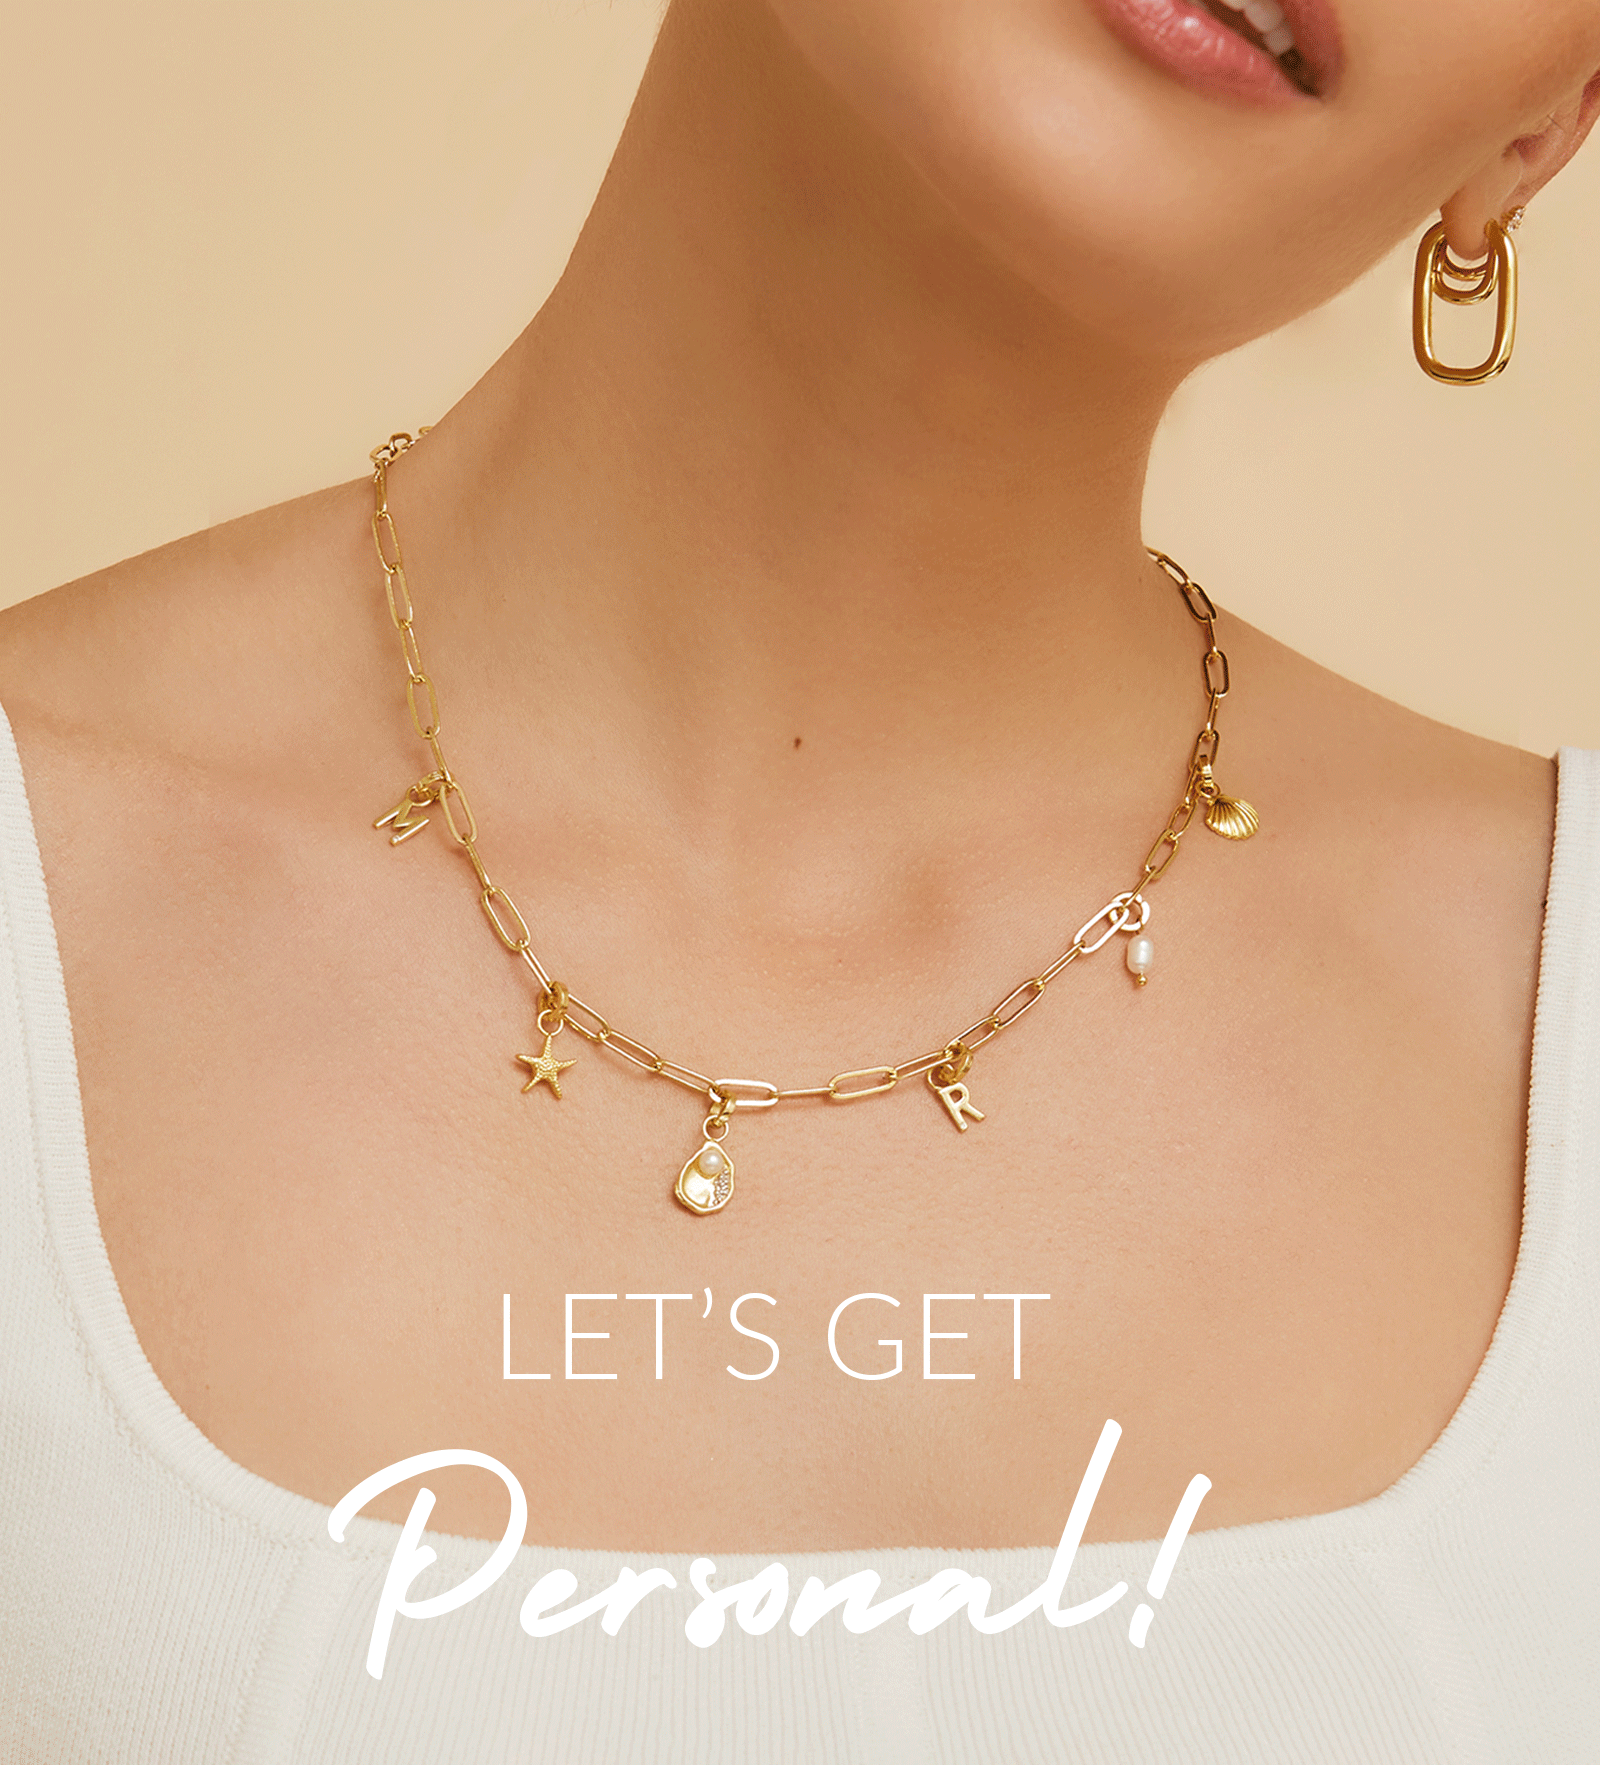 Stylish woman wearing a personalized necklace that says 'Let's get personal' from Arms Of Eve